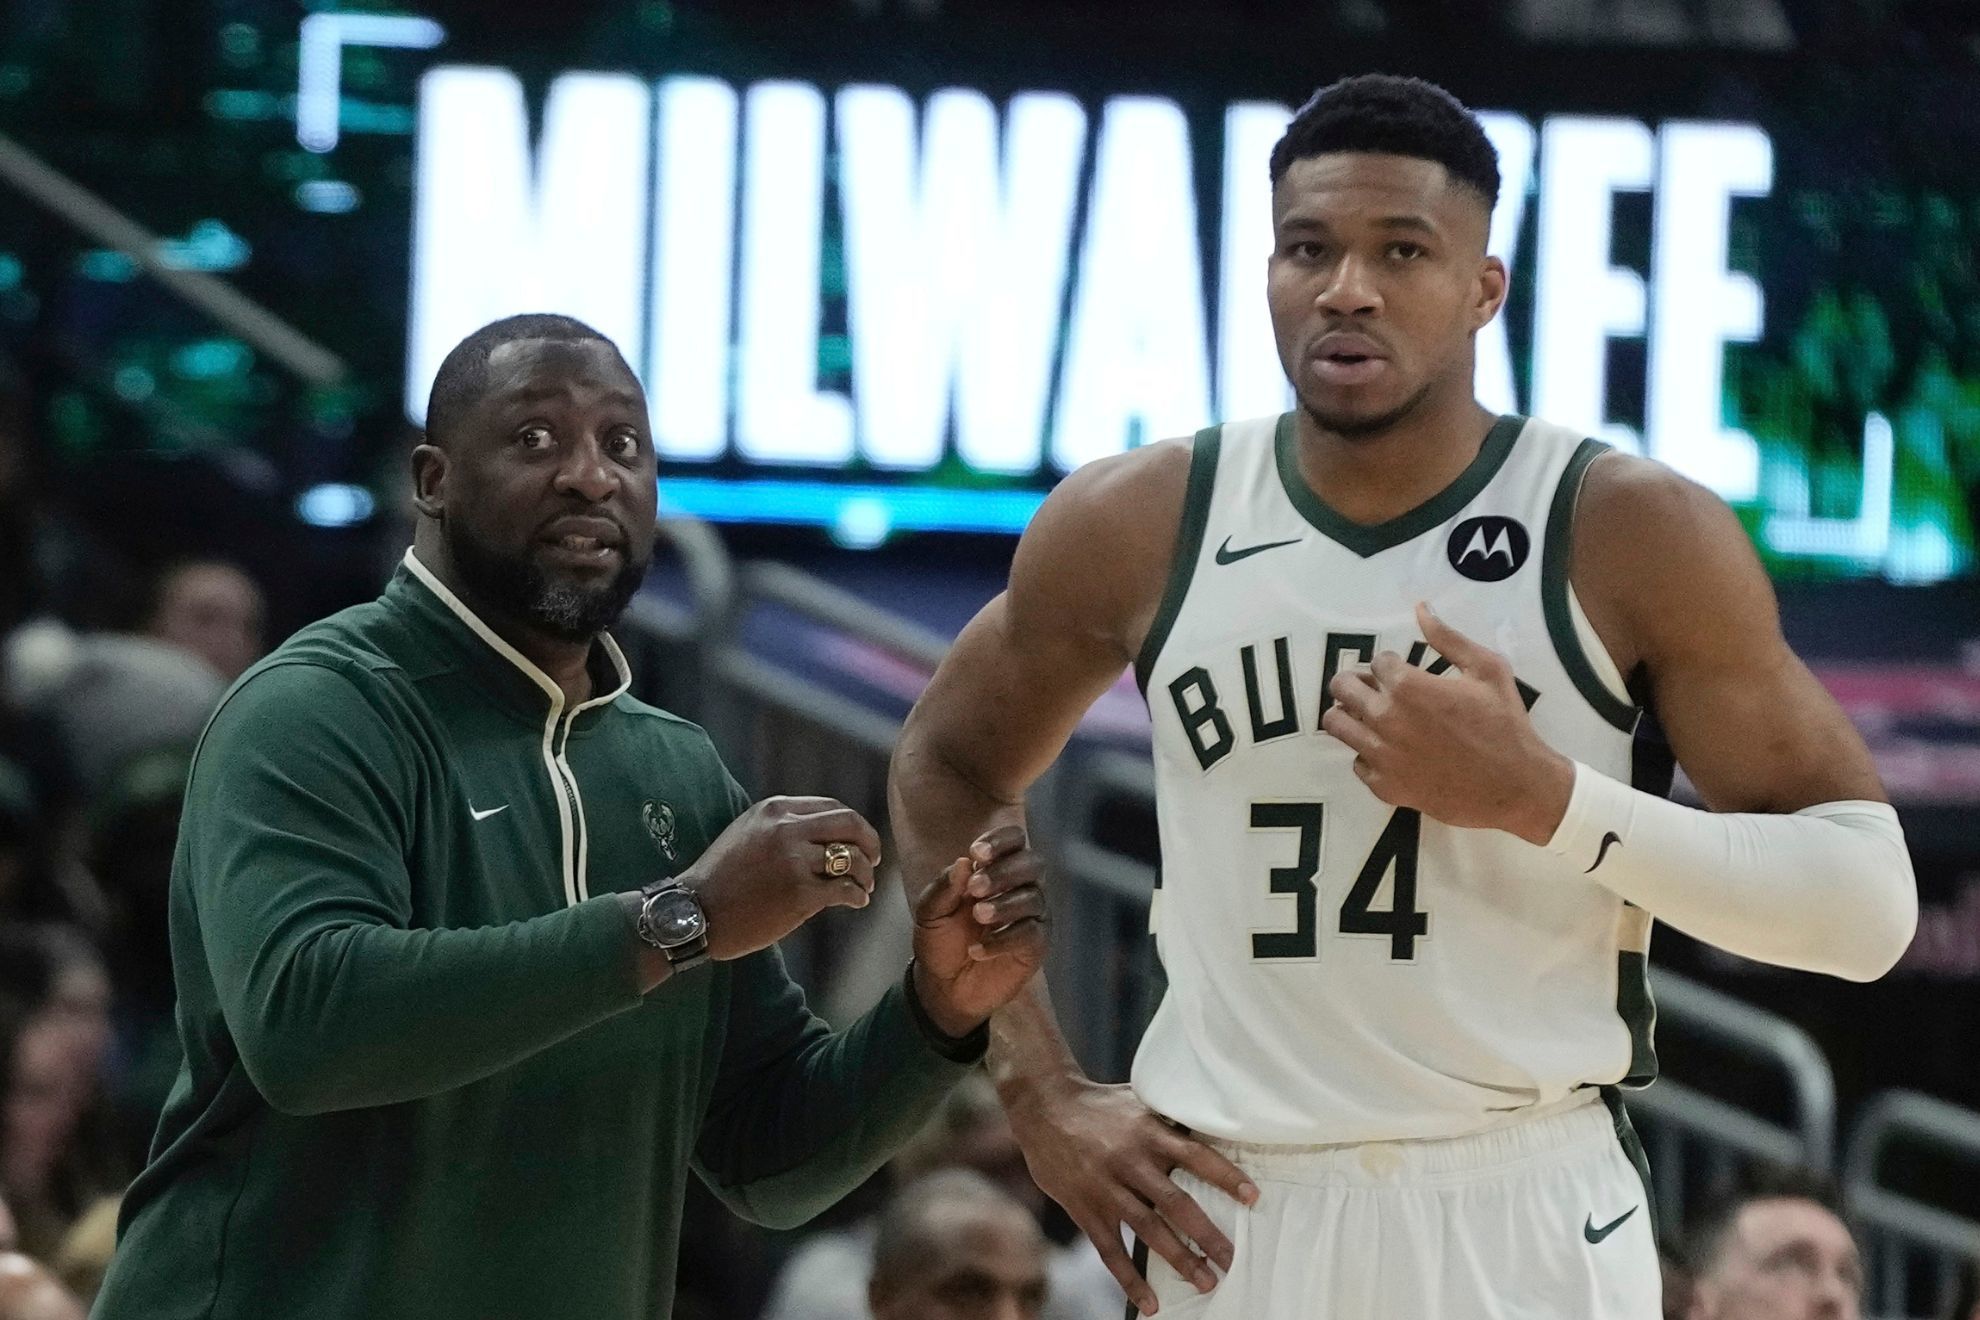 Bucks HC Adrian Griffin is a deer in the headlights while Giannis clearly runs Milwaukee